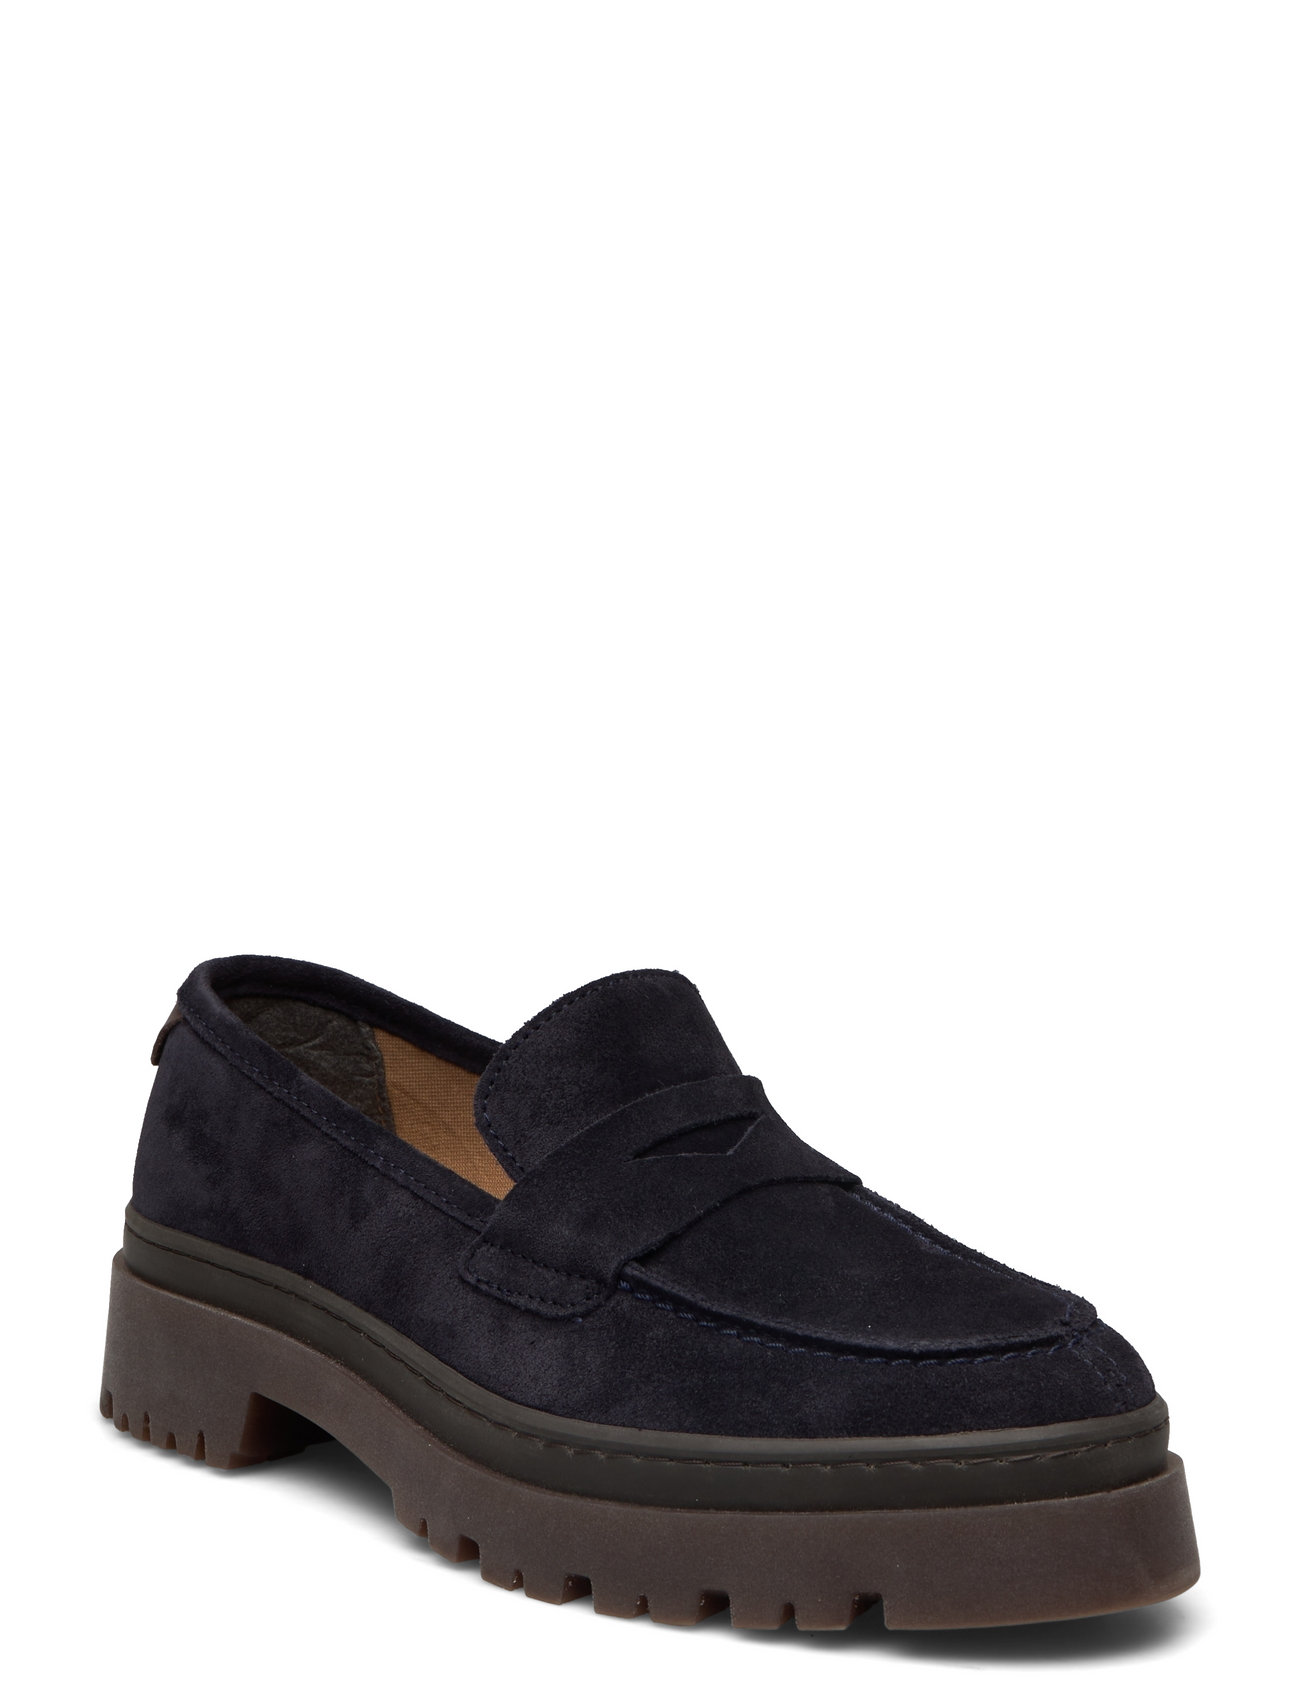 Aligrey Loafer - Loafers Boozt.com